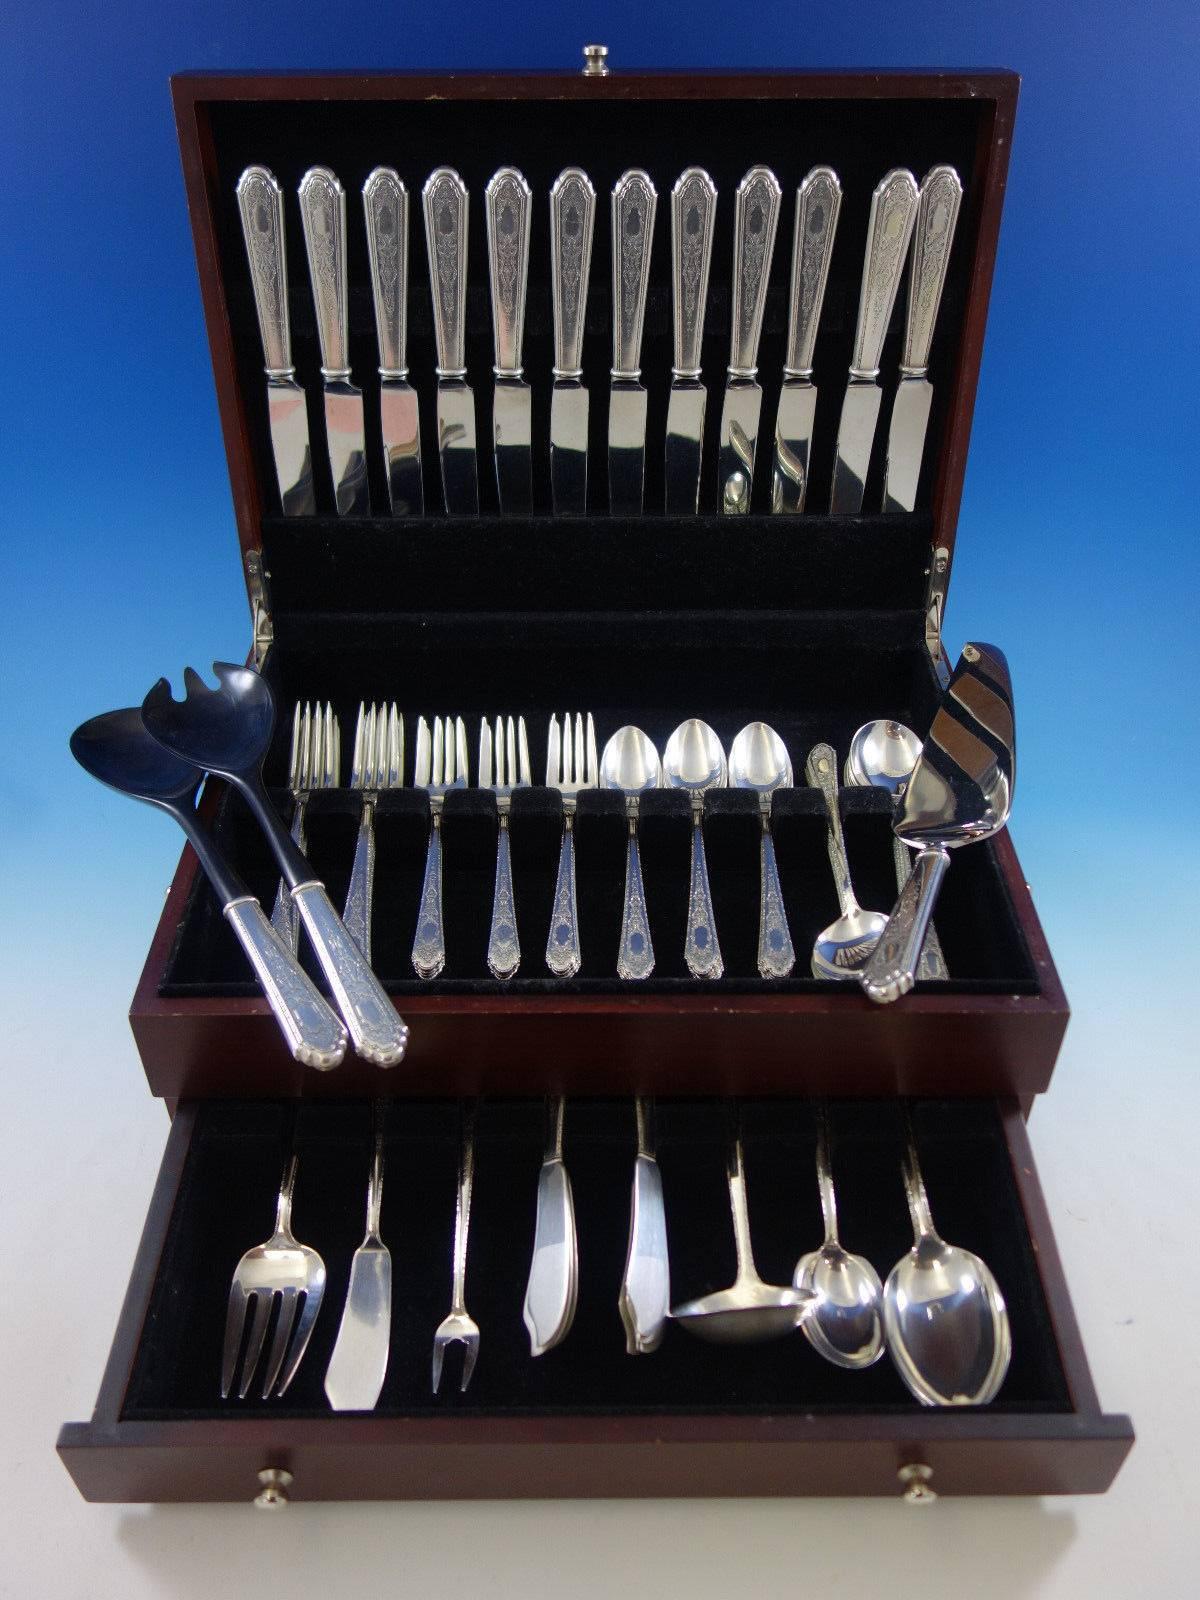 Mary II by Lunt sterling silver flatware set of 82 pieces. This set includes: 12 knives, 9